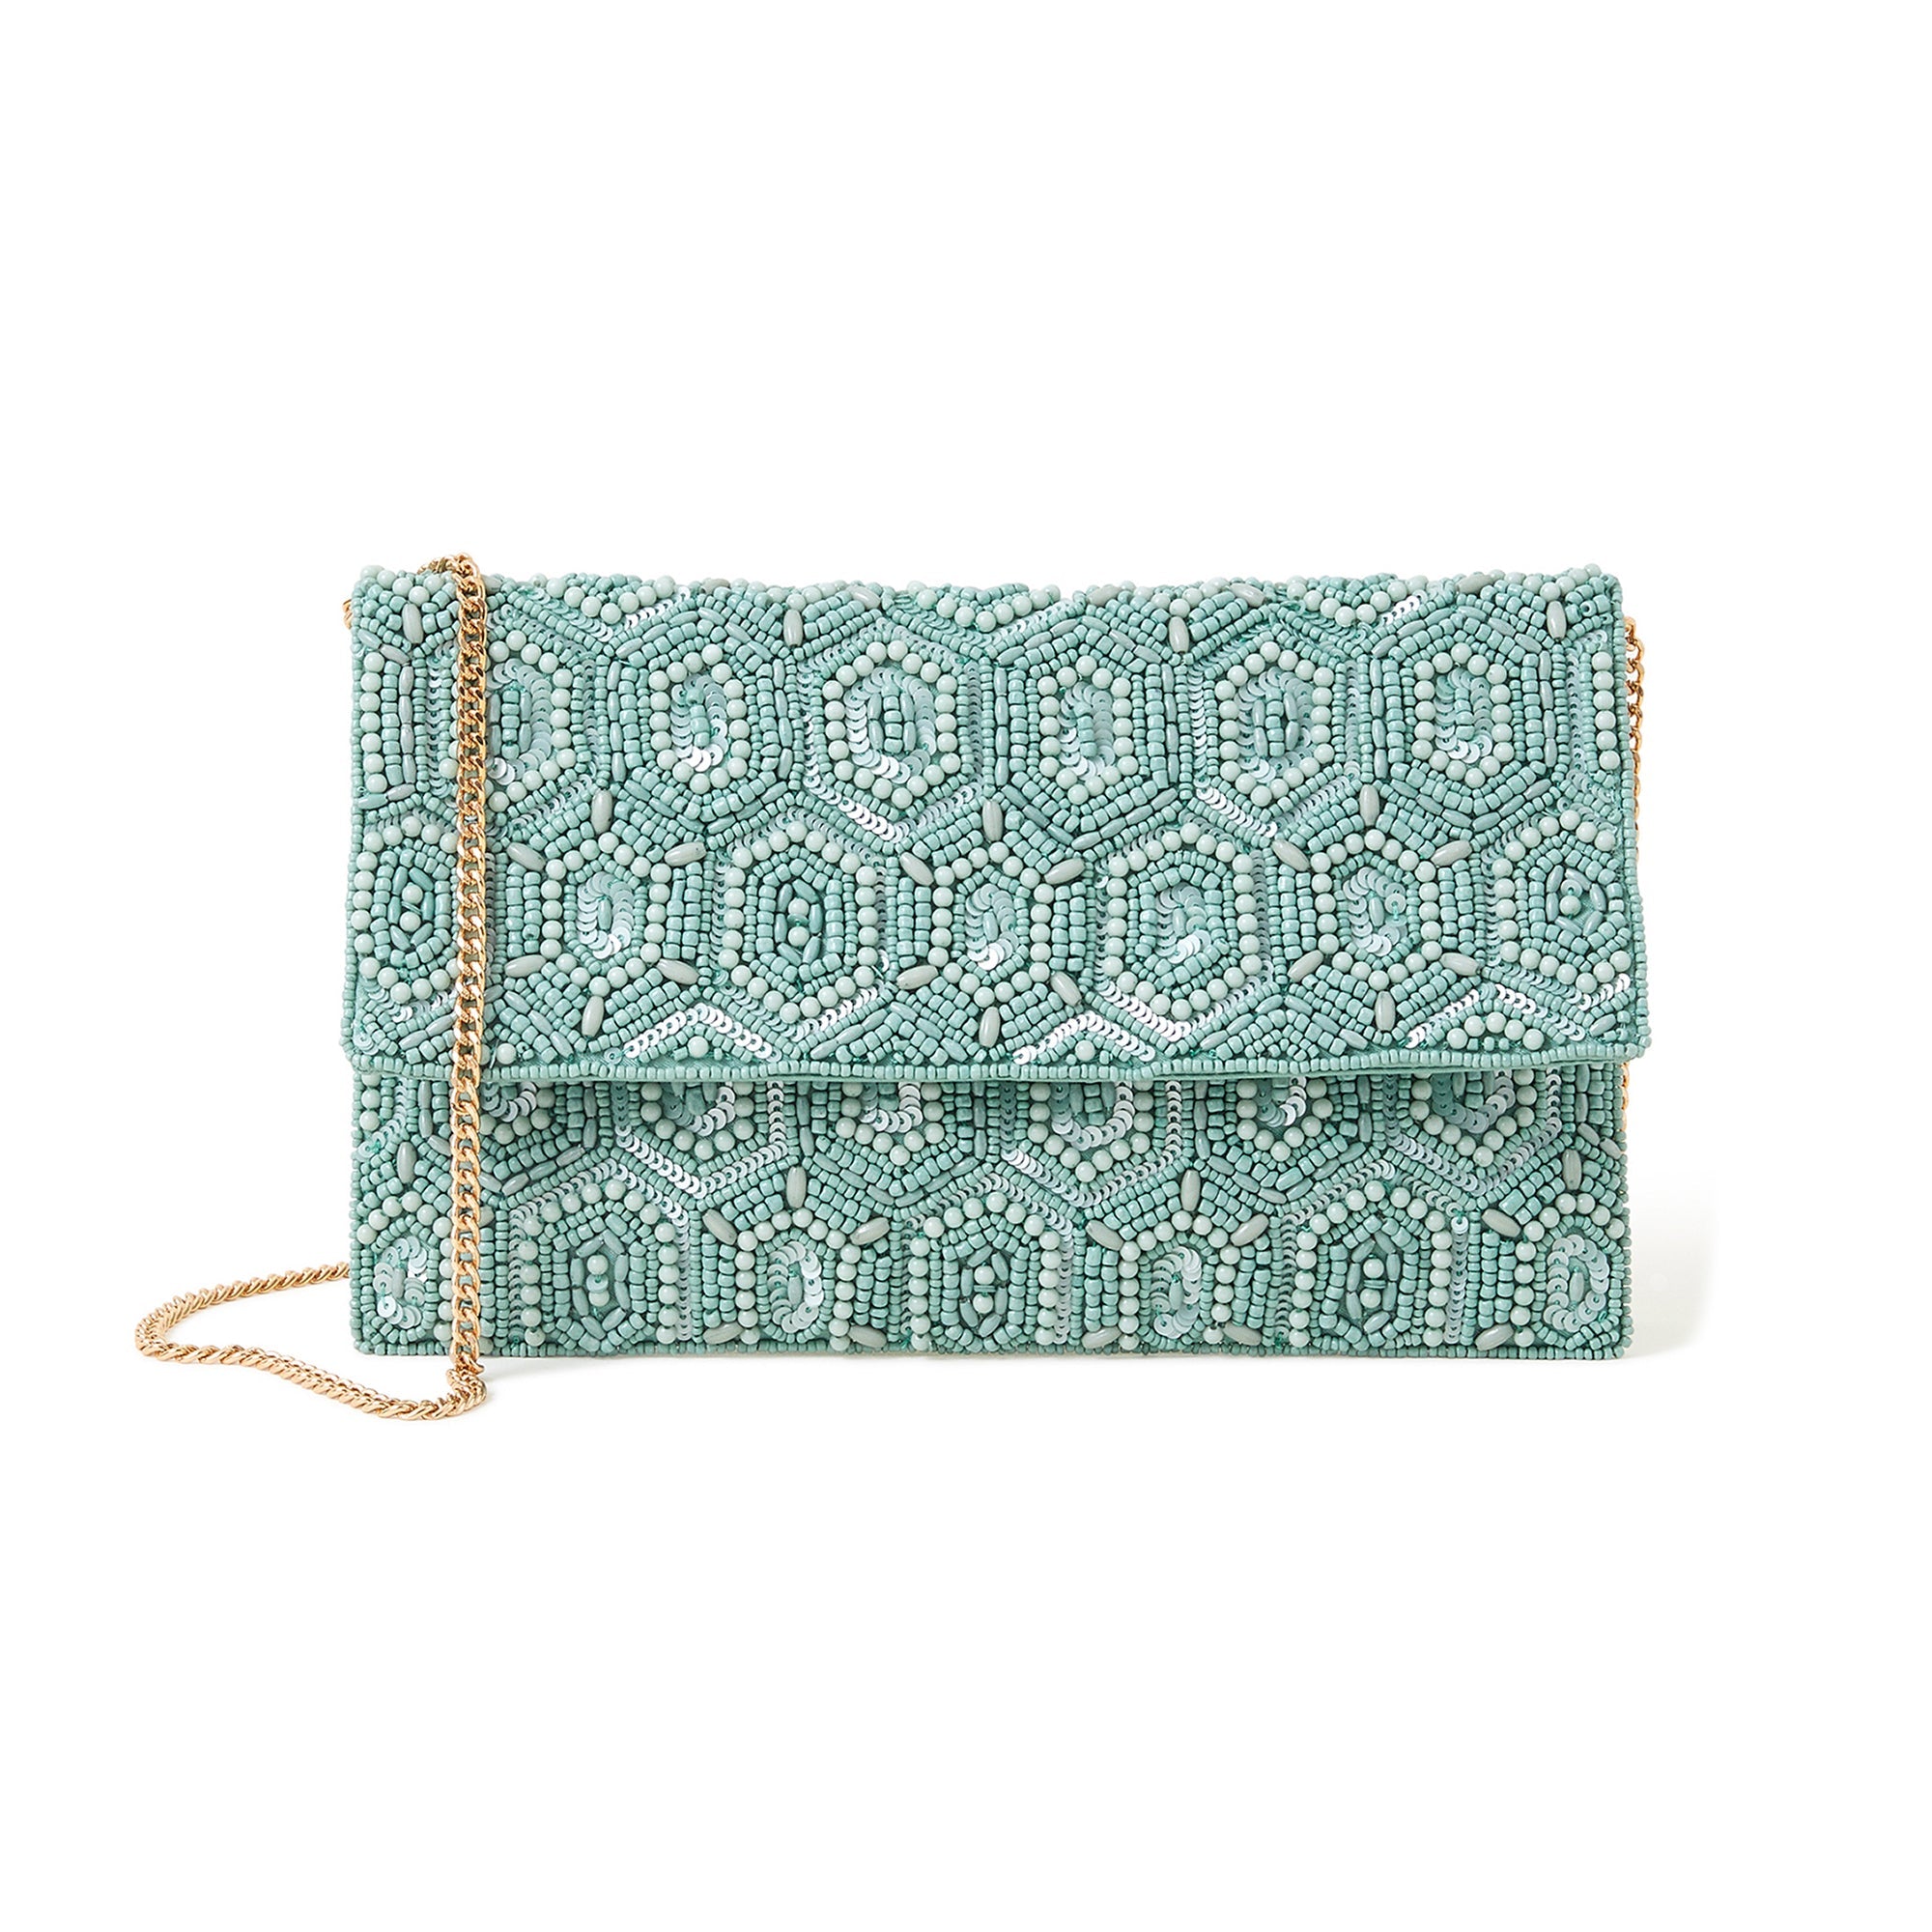 Accessorize London Women's Green Embellished Fold-Over Clutch Bag